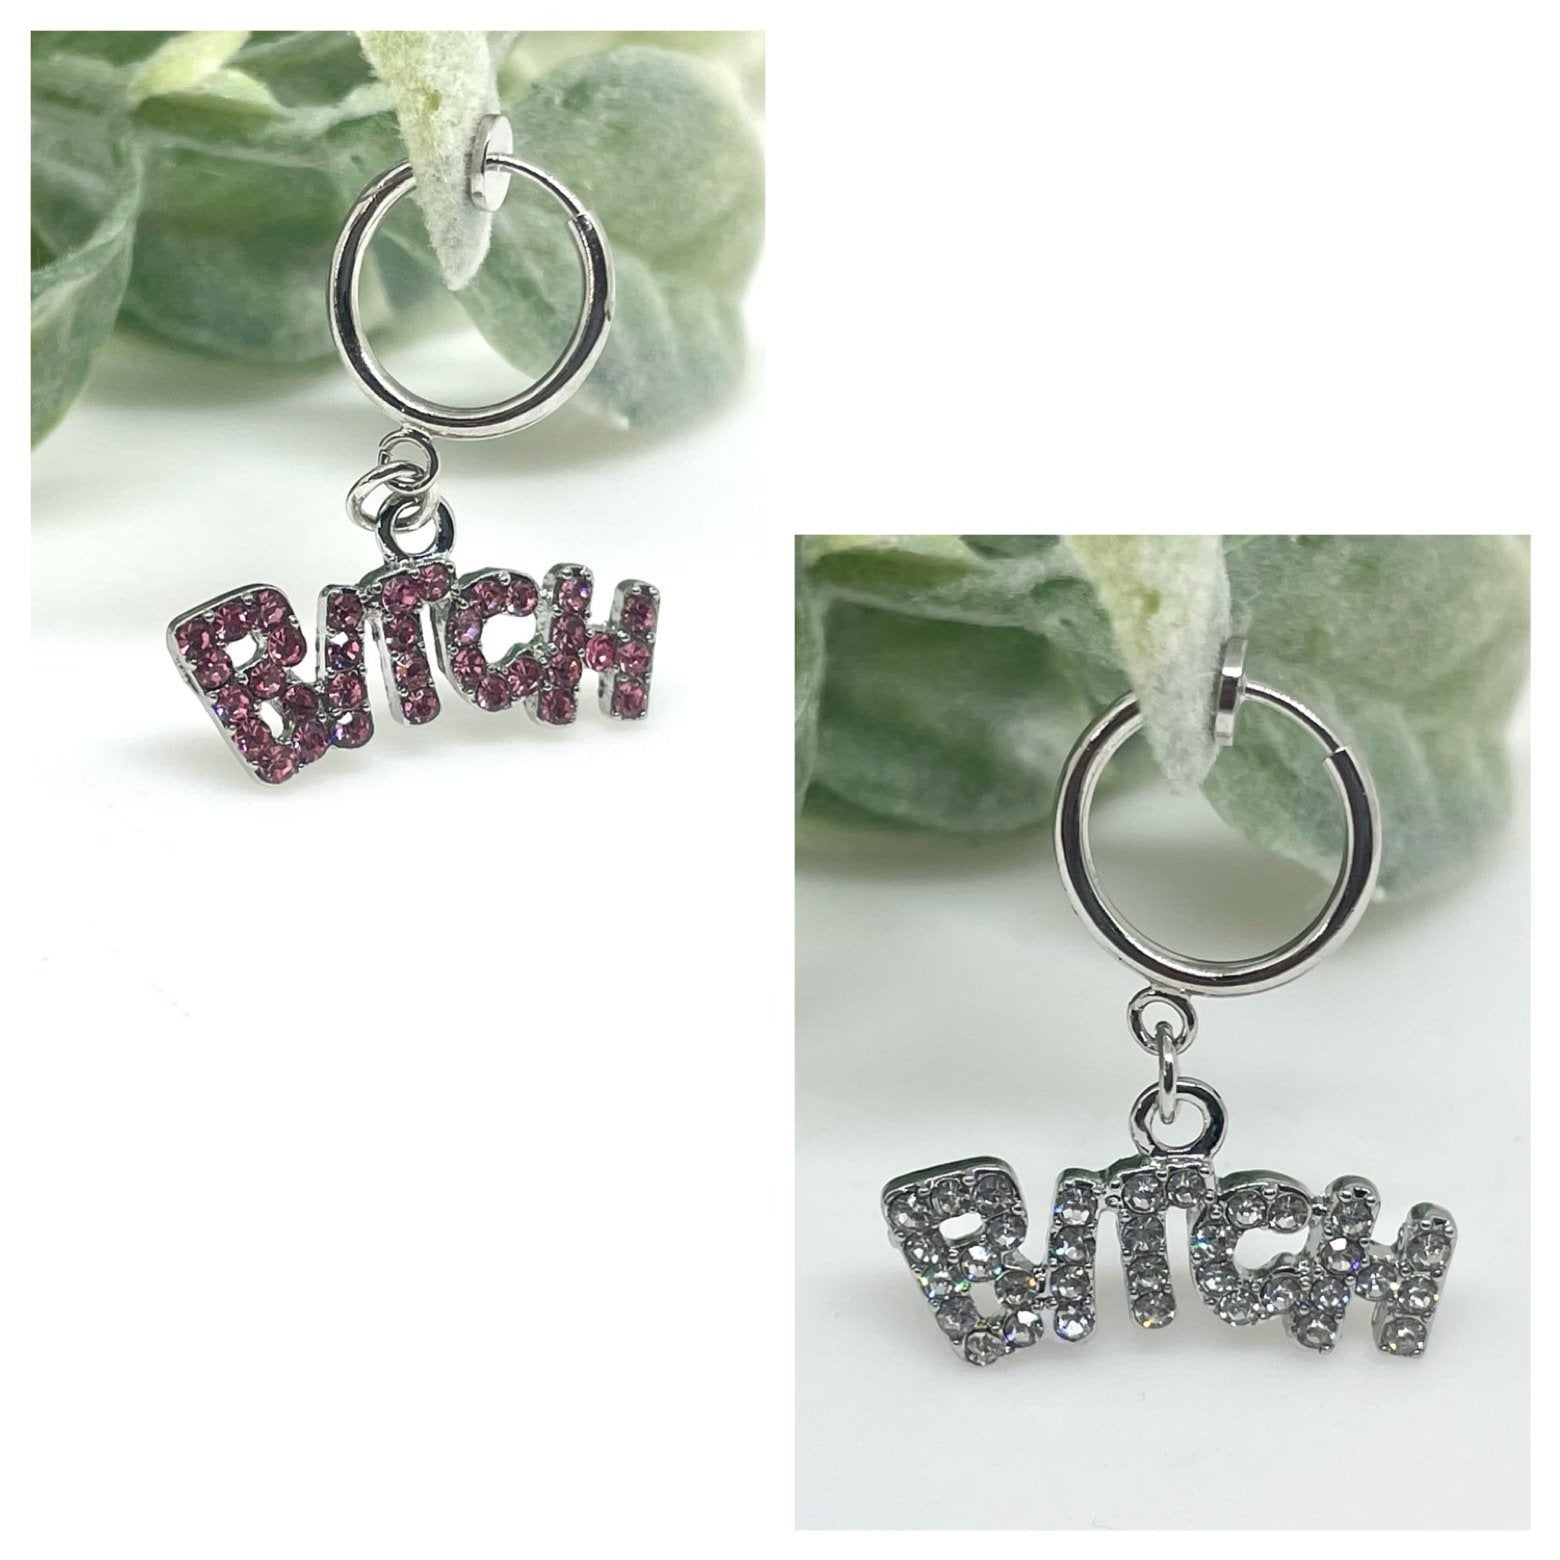 Fake Belly Ring - Dangle Belly Button Ring - Clip on Belly Ring - Bitch Belly Ring